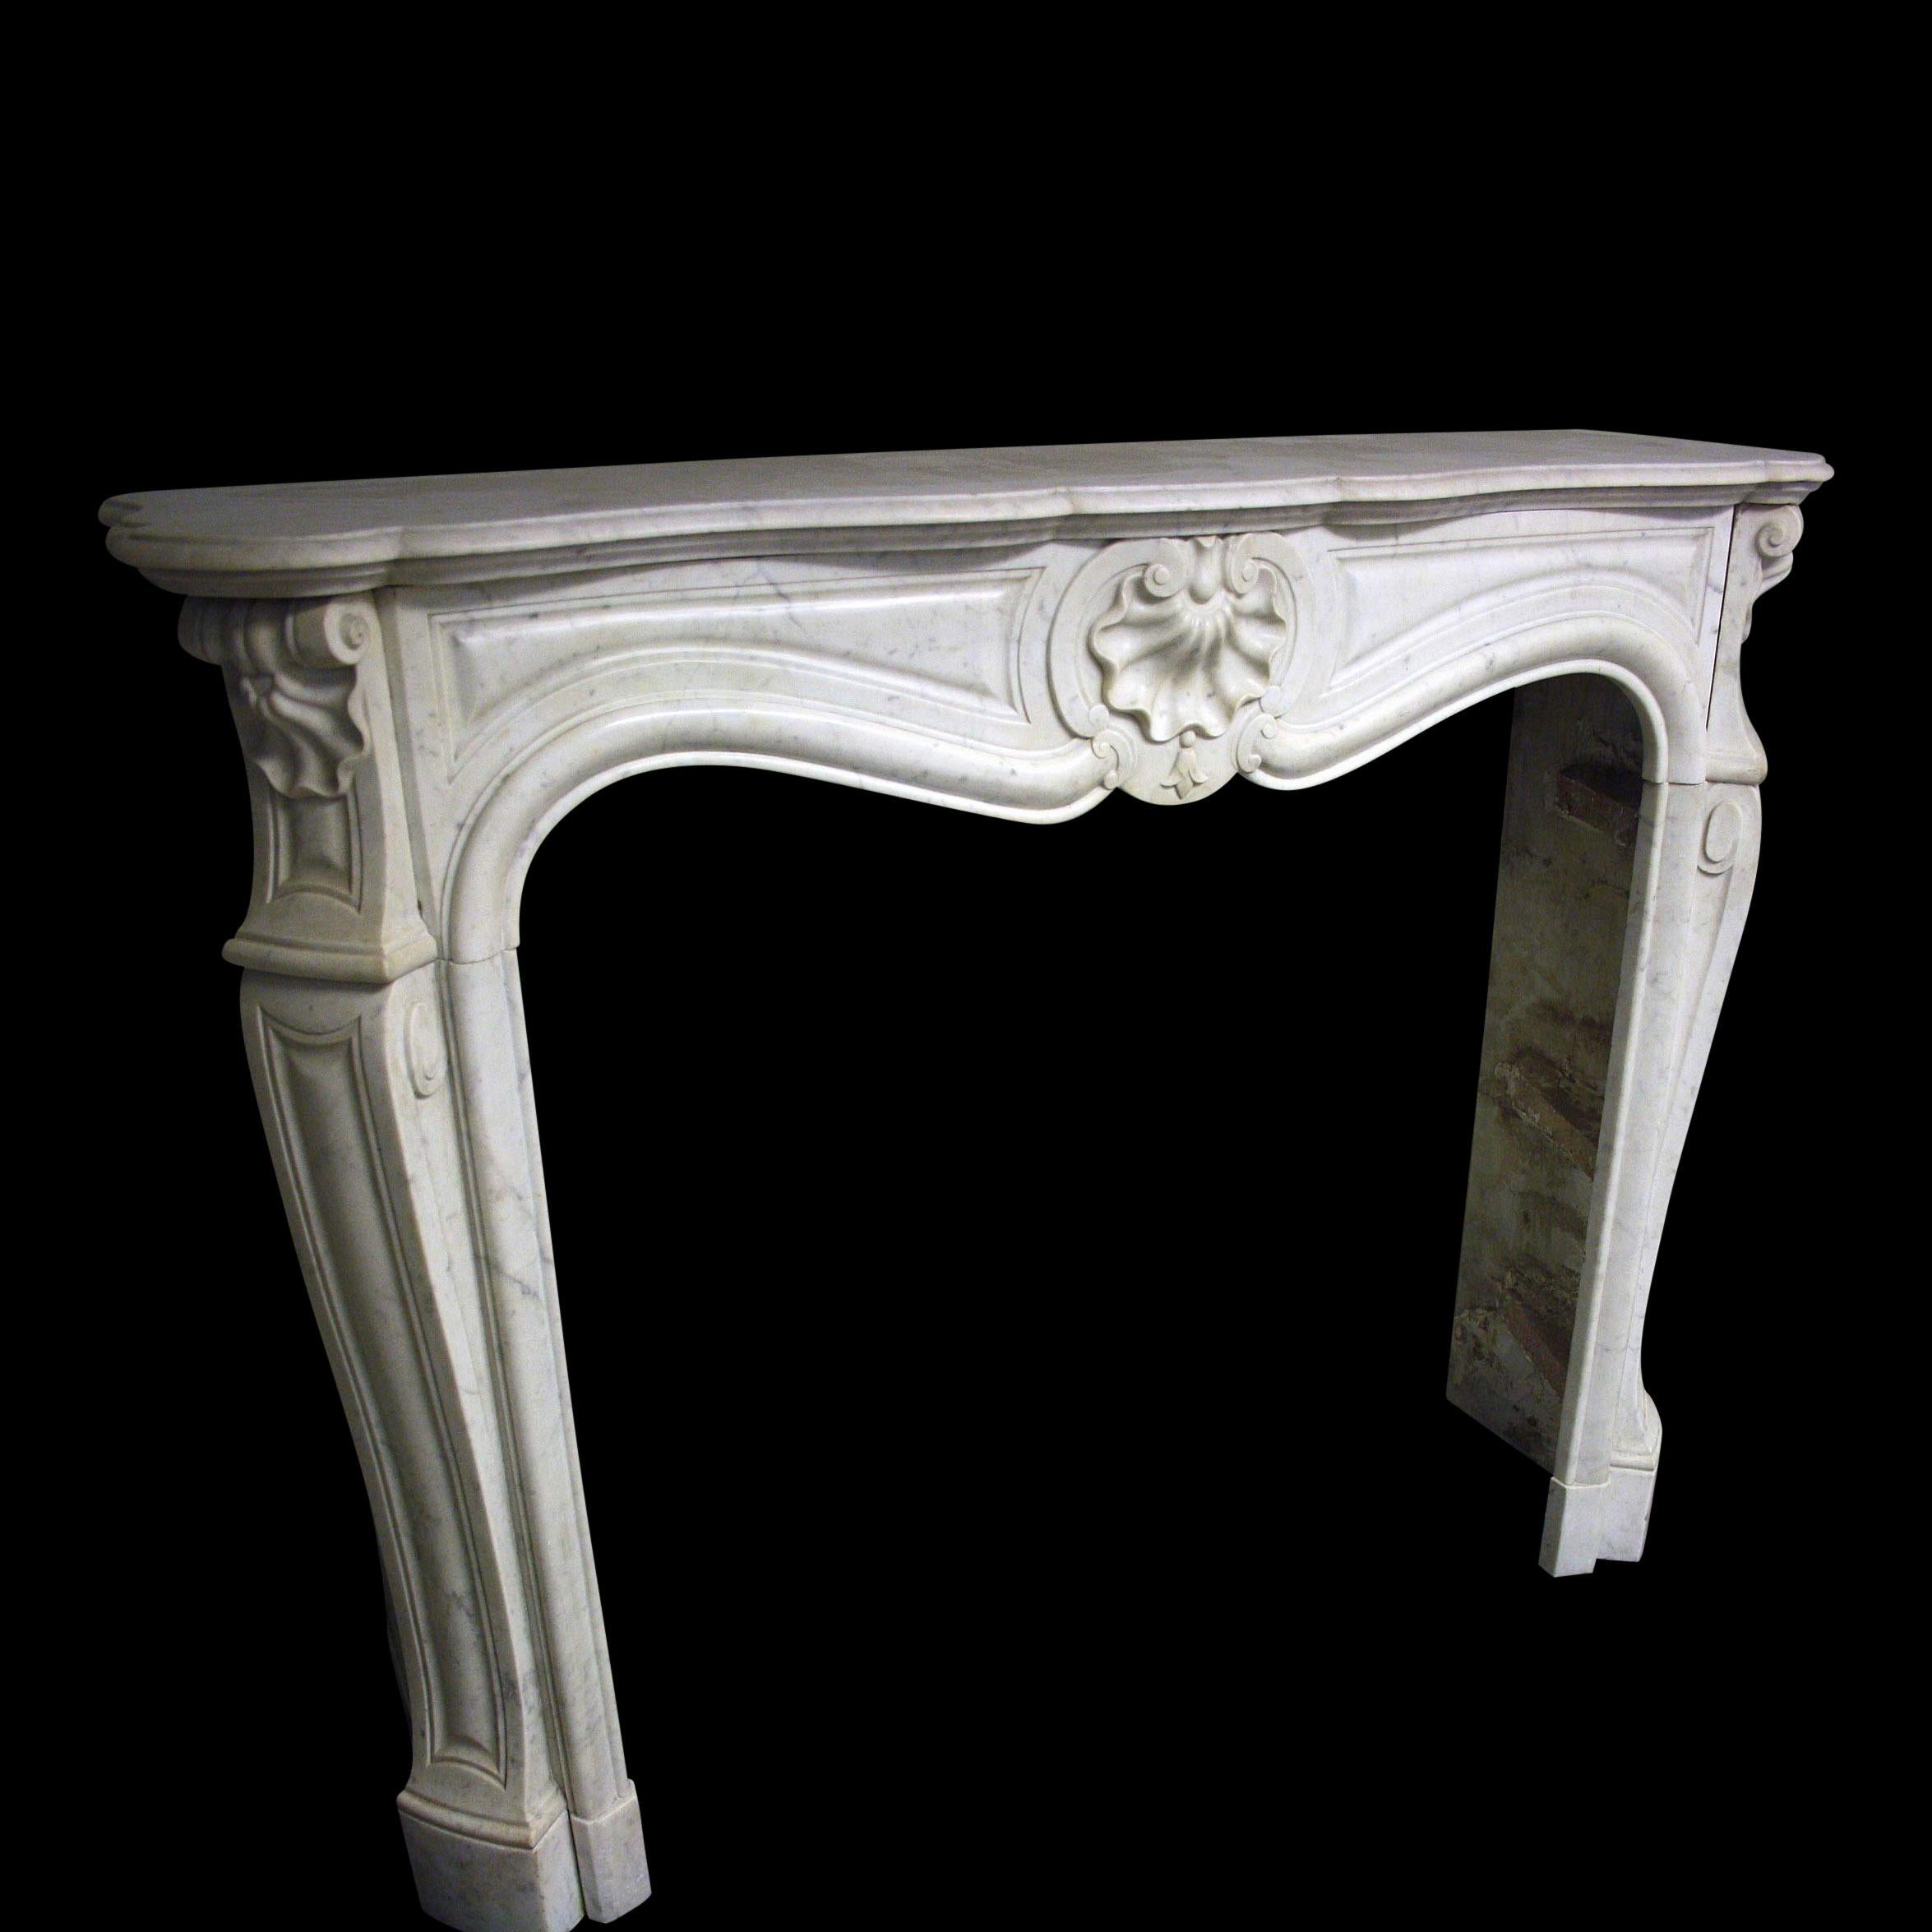 A 19th century French marble chimneypiece in Louis XV manner.